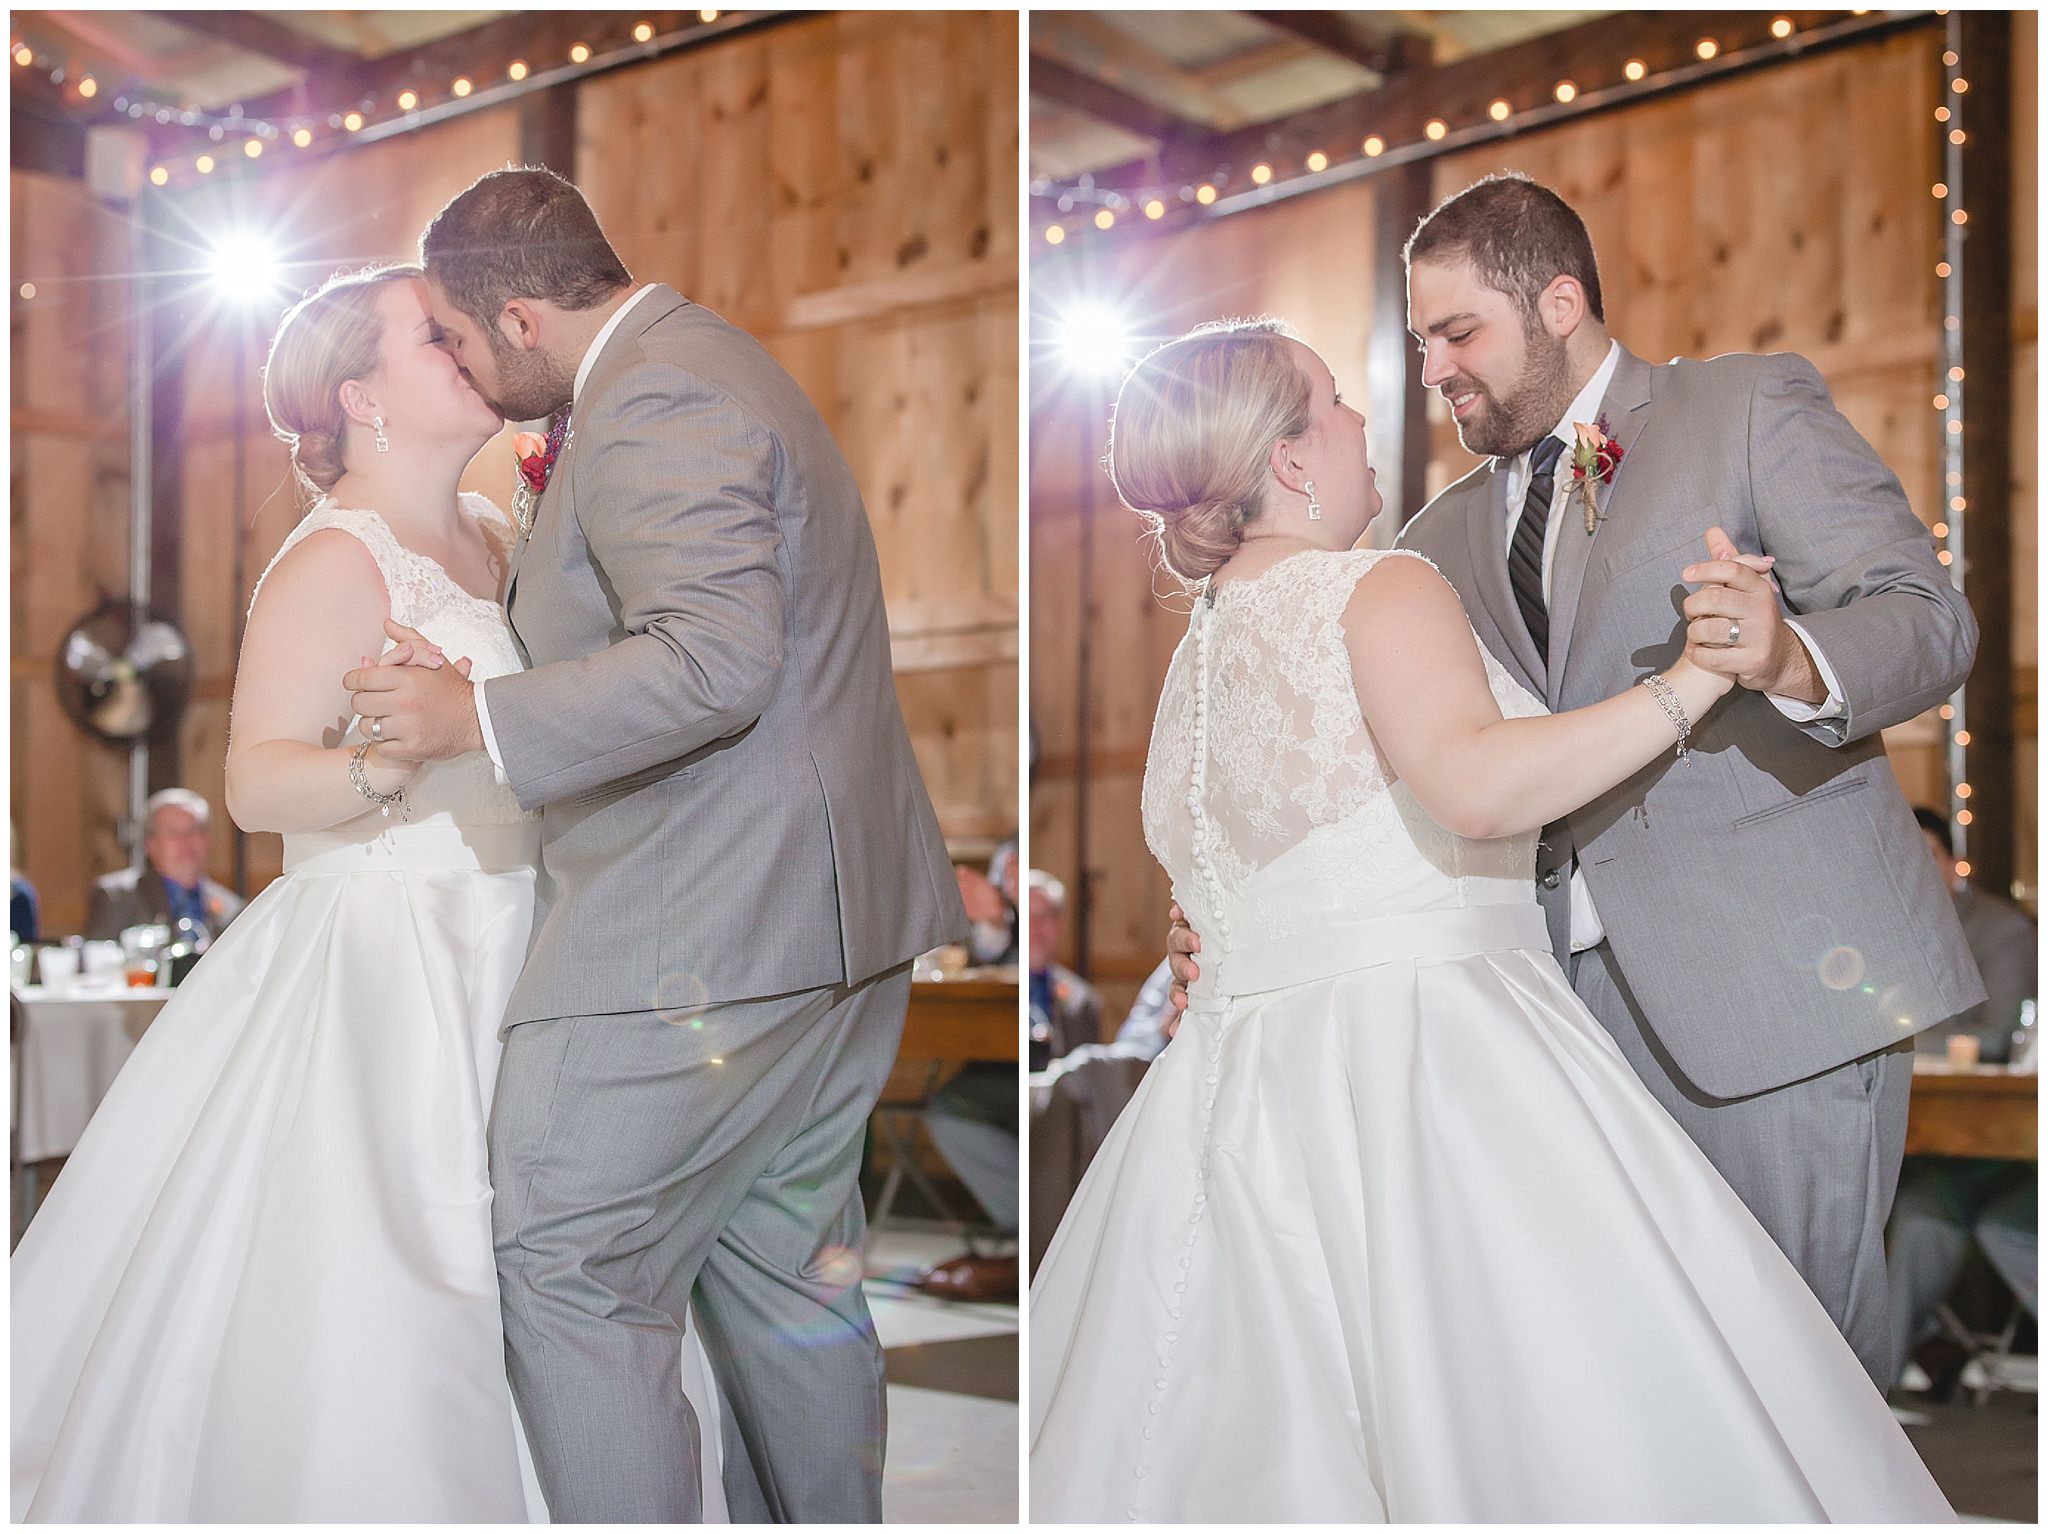 Bride and groom's first dance at the Barn at Soergel Hollow